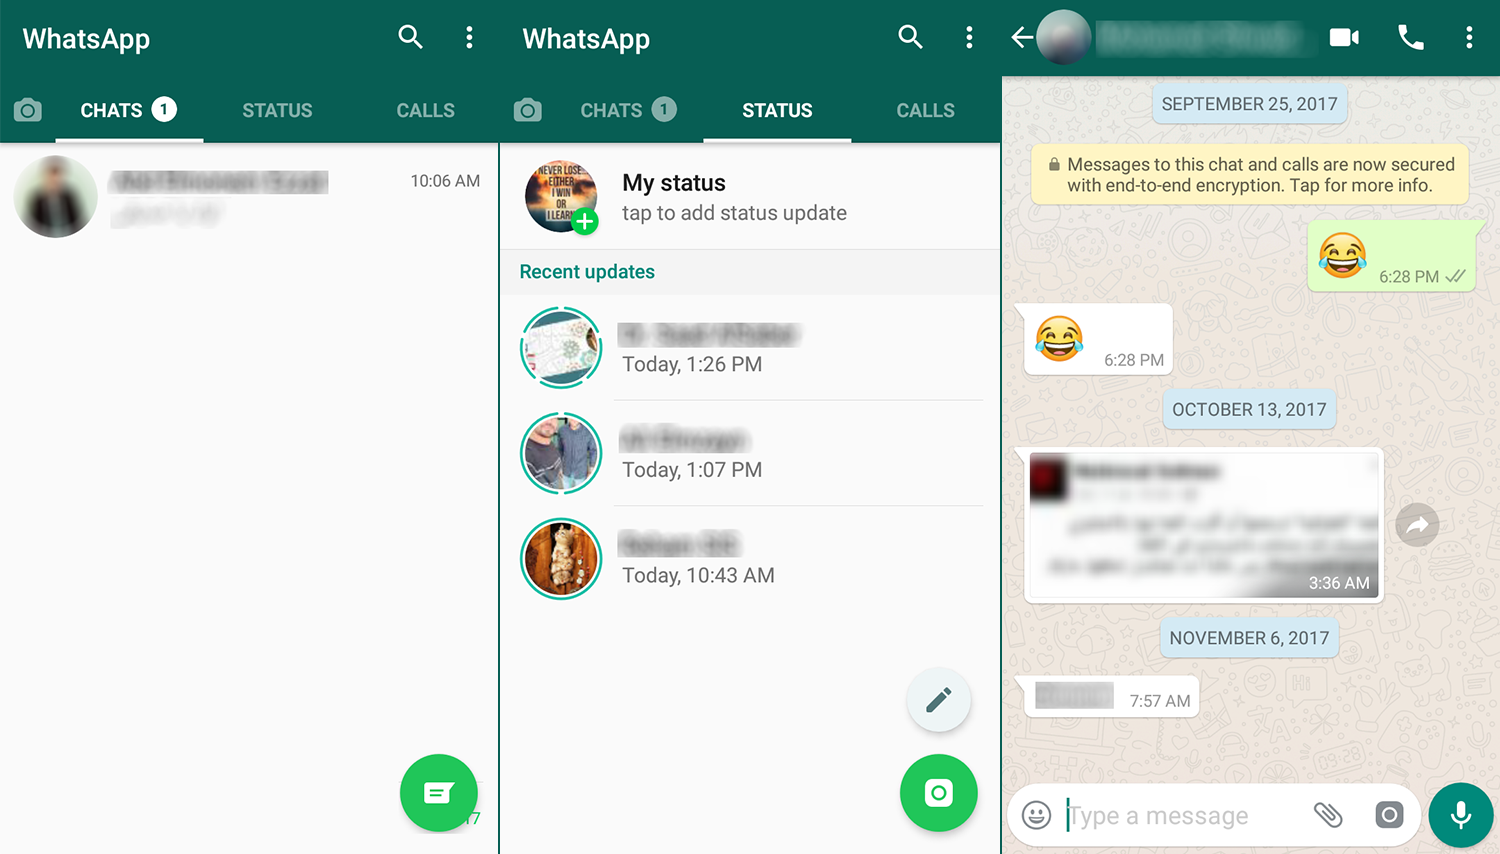 Whatsapp is set to update its terms of service in 2021